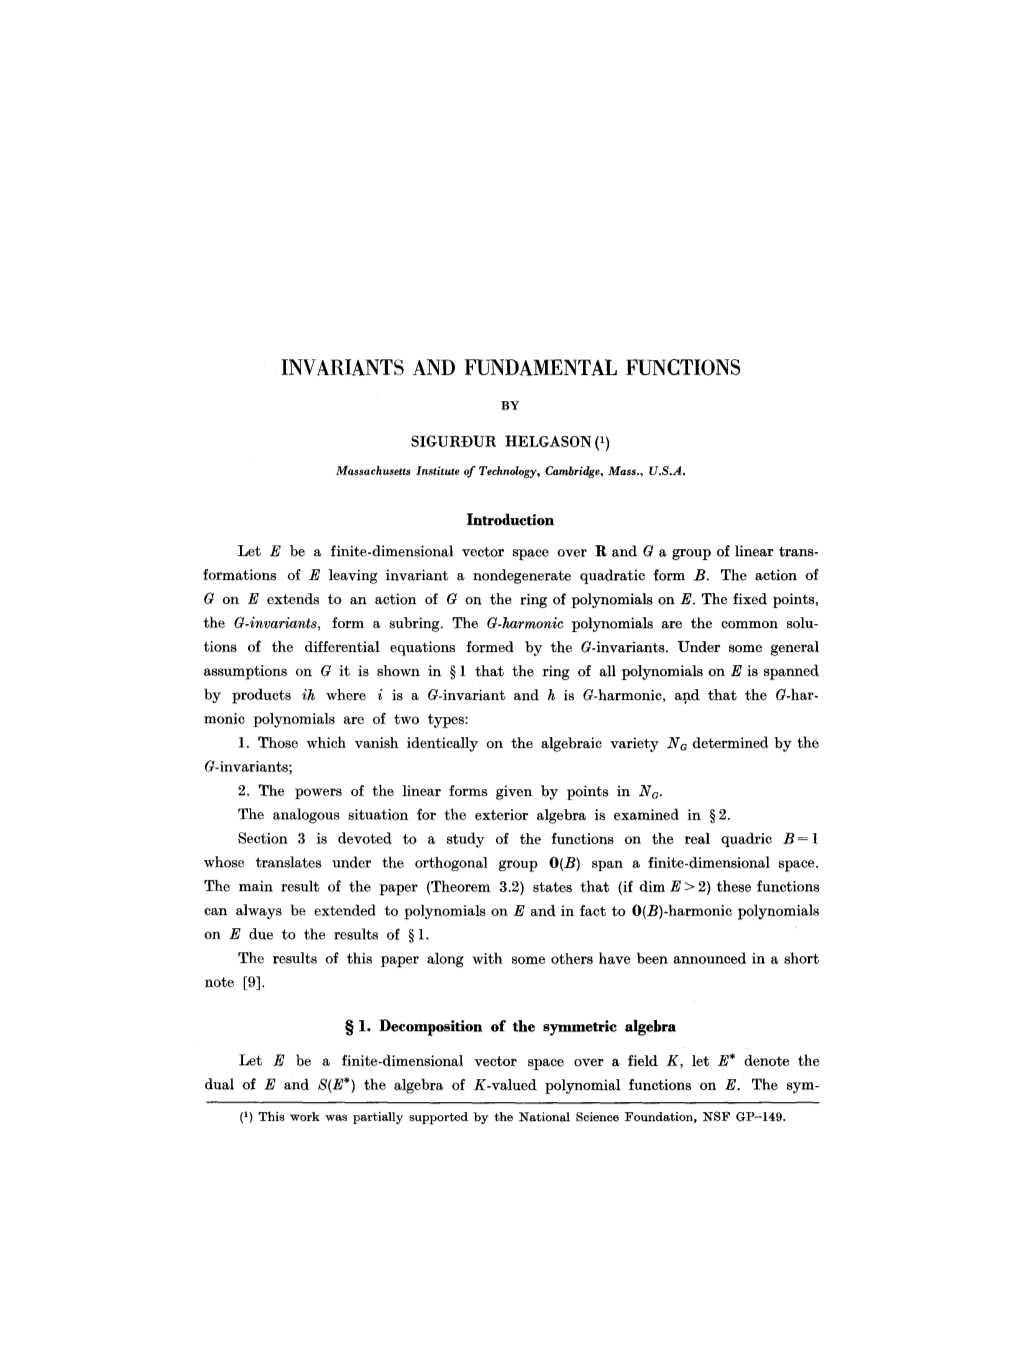 Invariants and Fundamental Functions